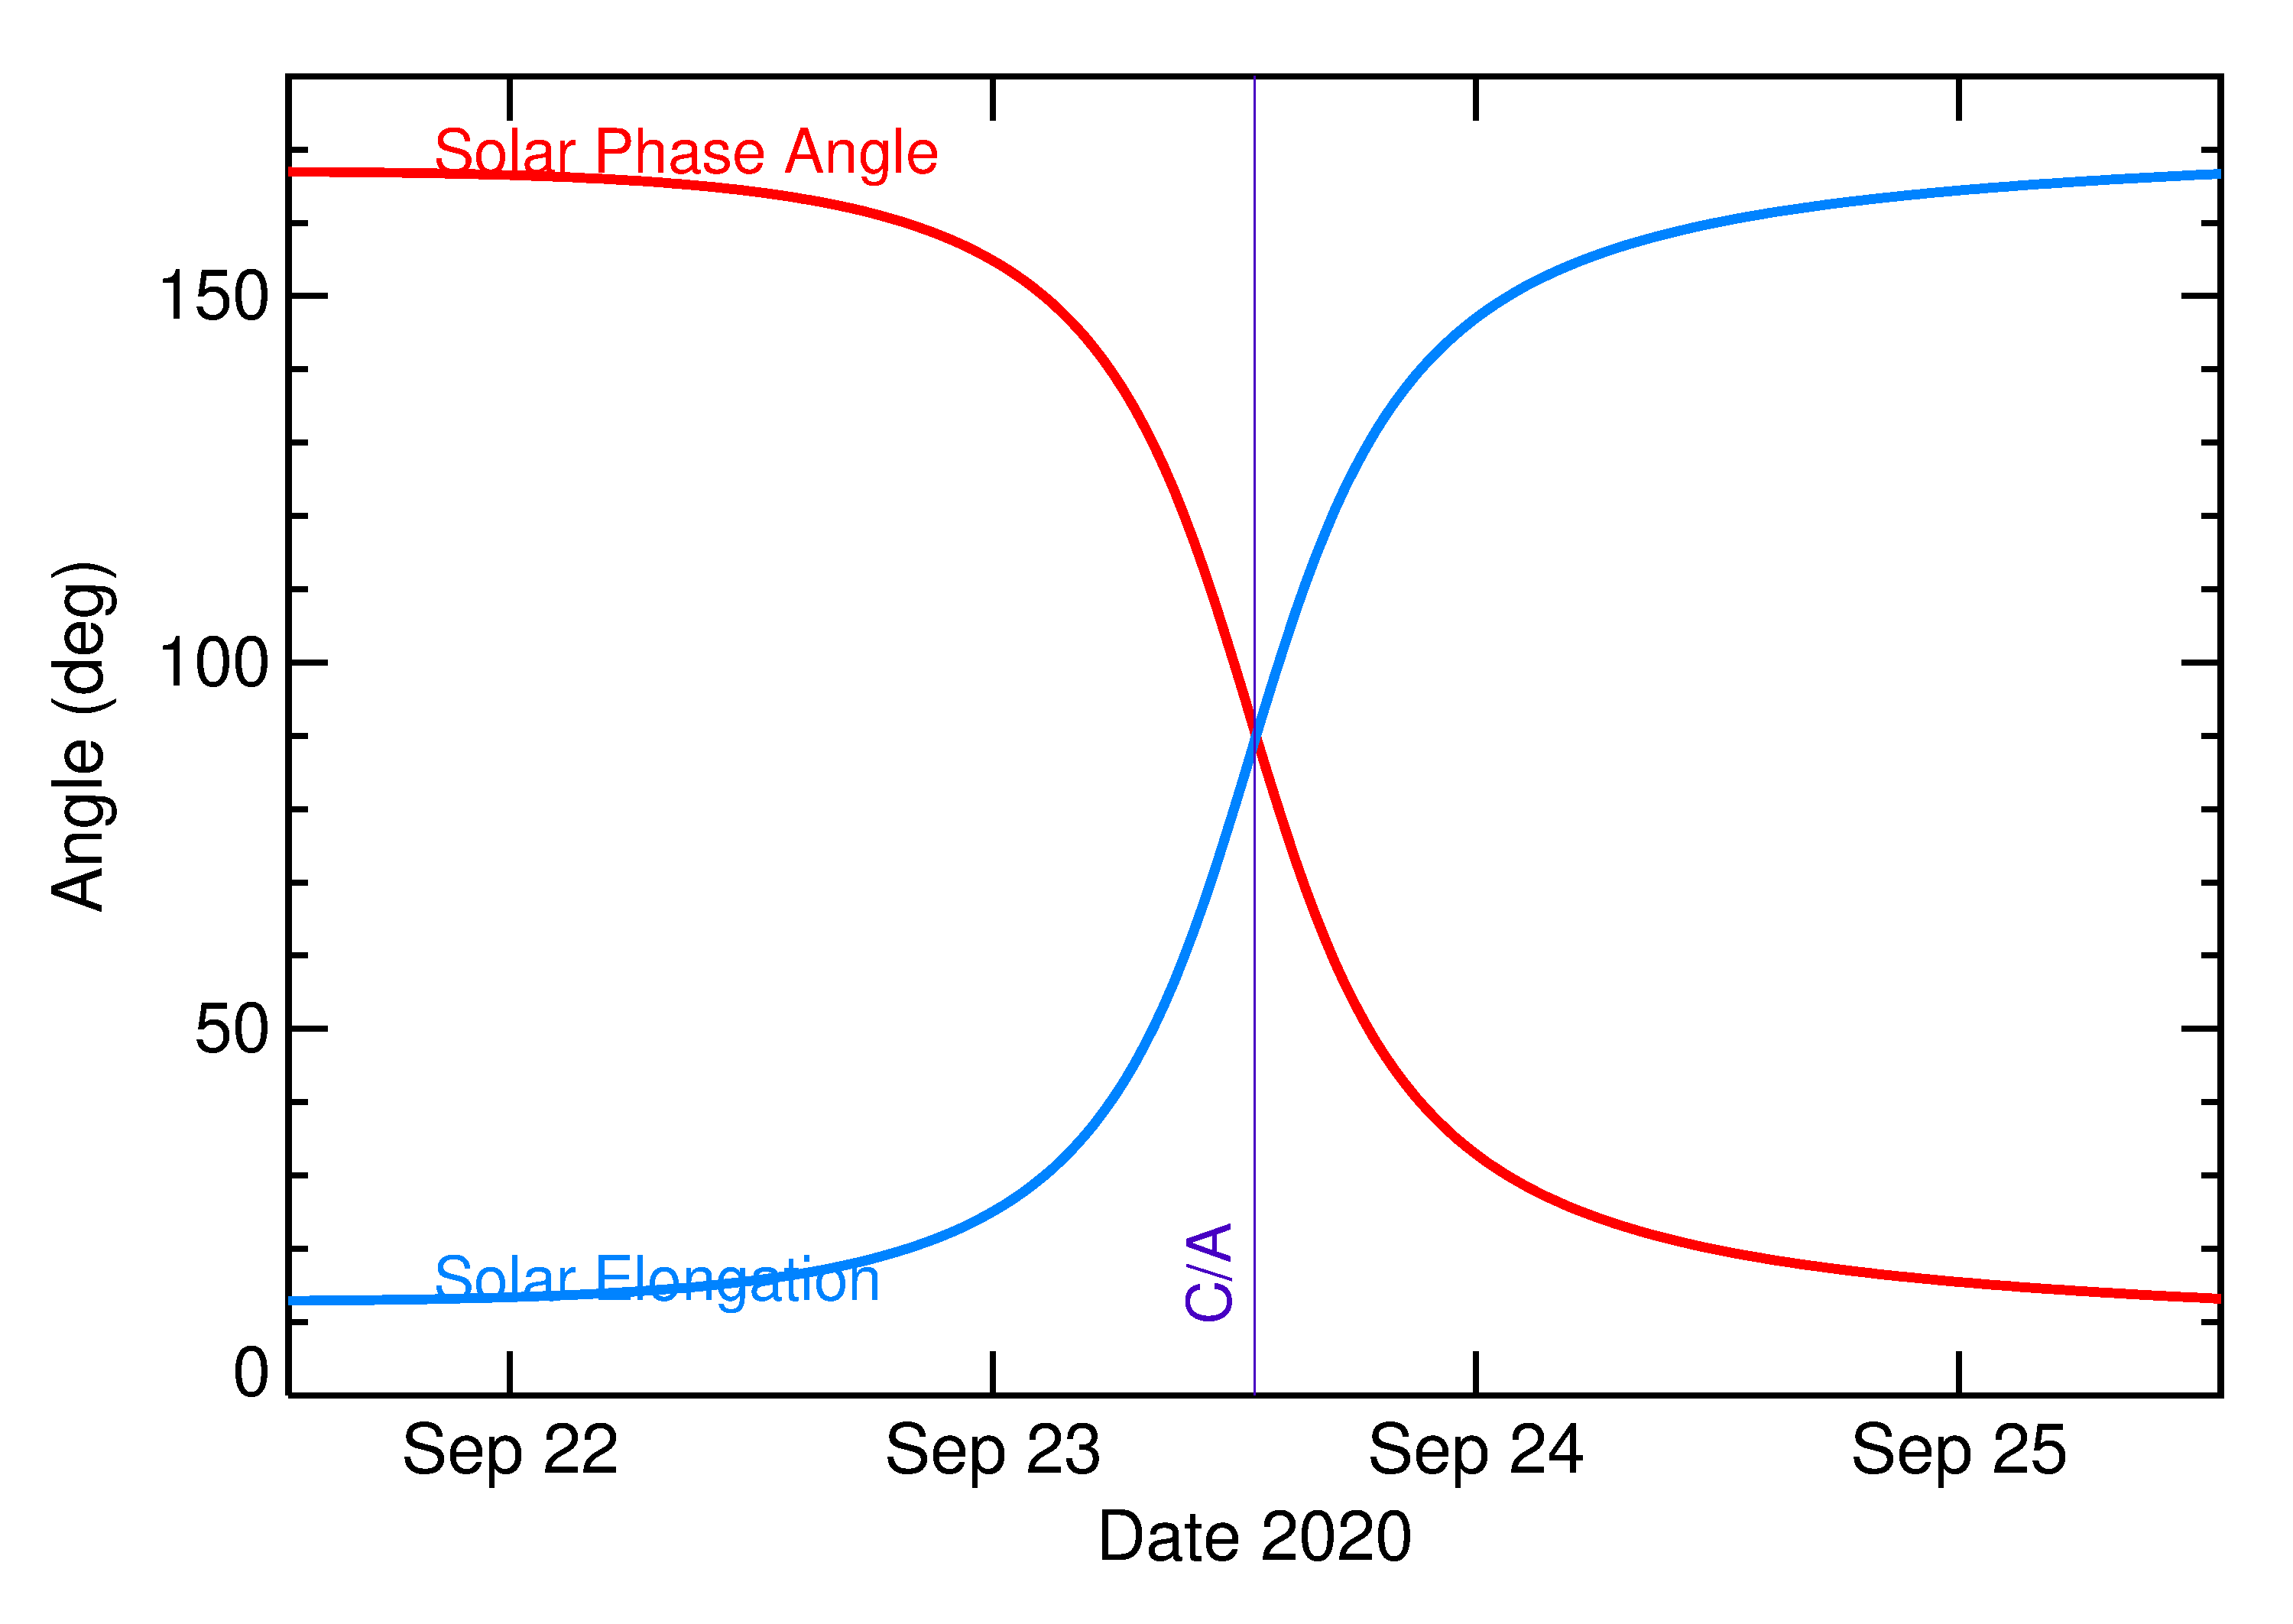 Solar Elongation and Solar Phase Angle of 2020 SG6 in the days around closest approach